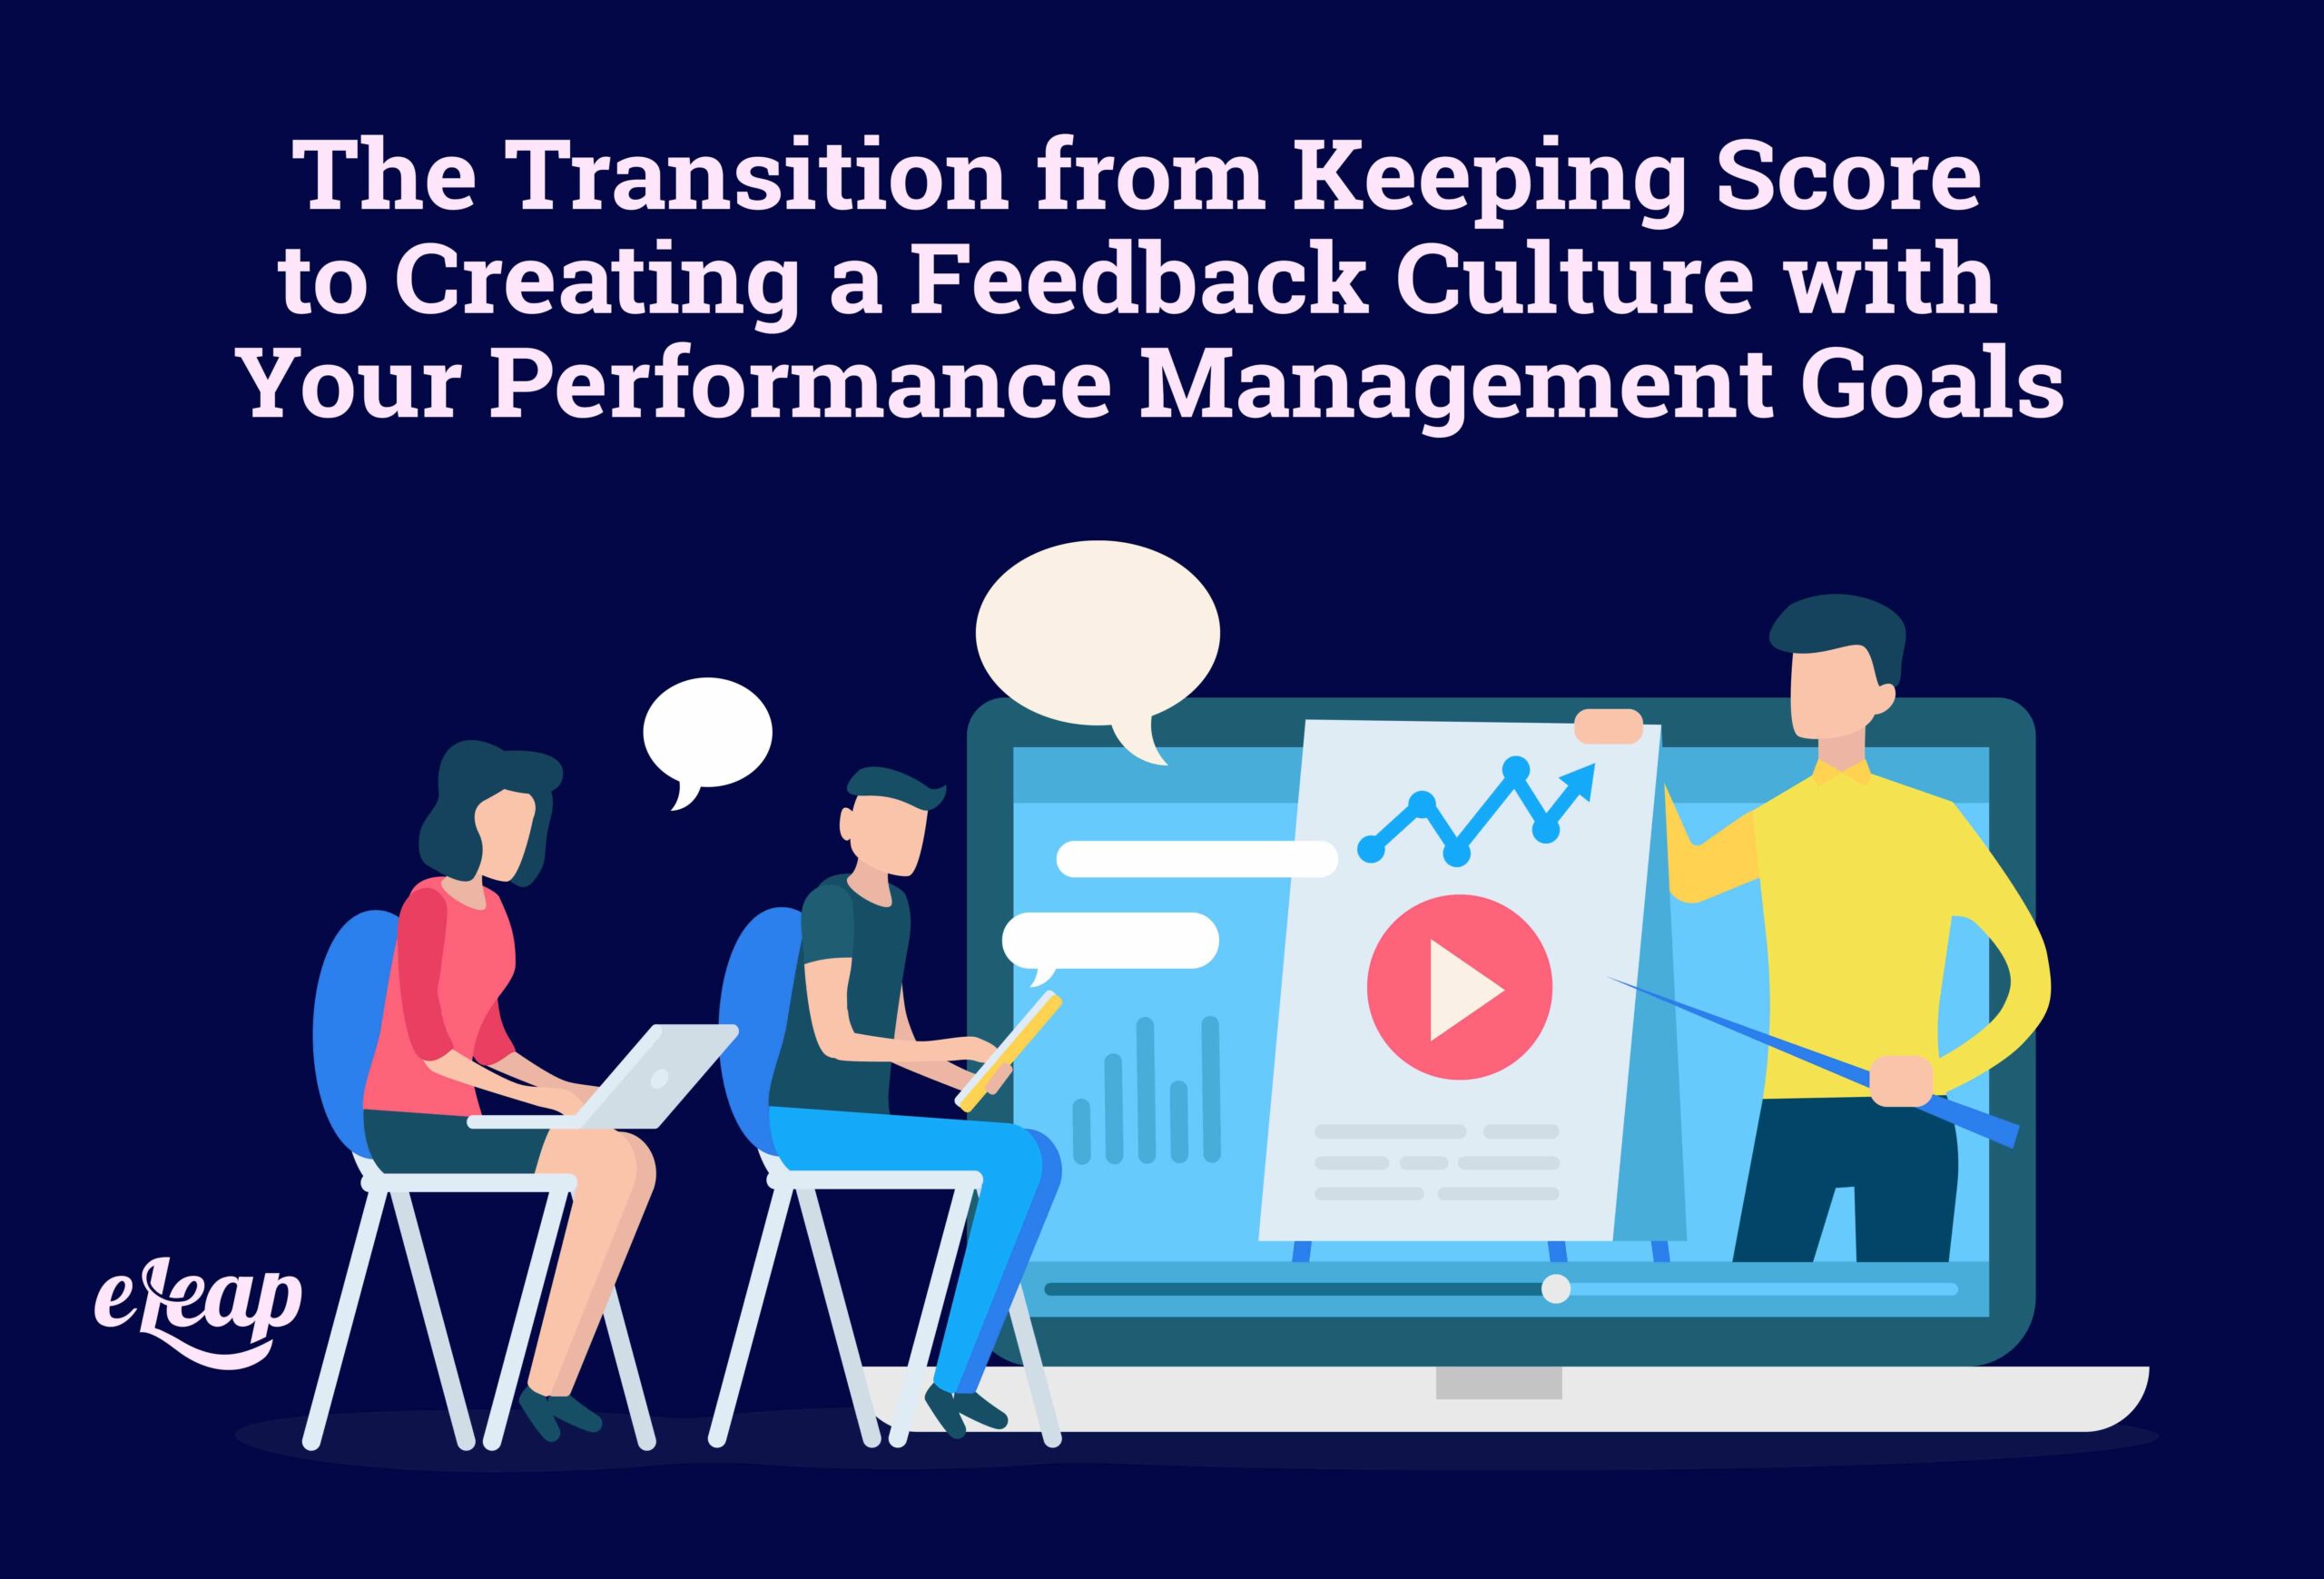 The Transition from Keeping Score to Creating a Feedback Culture with Your Performance Management Goals